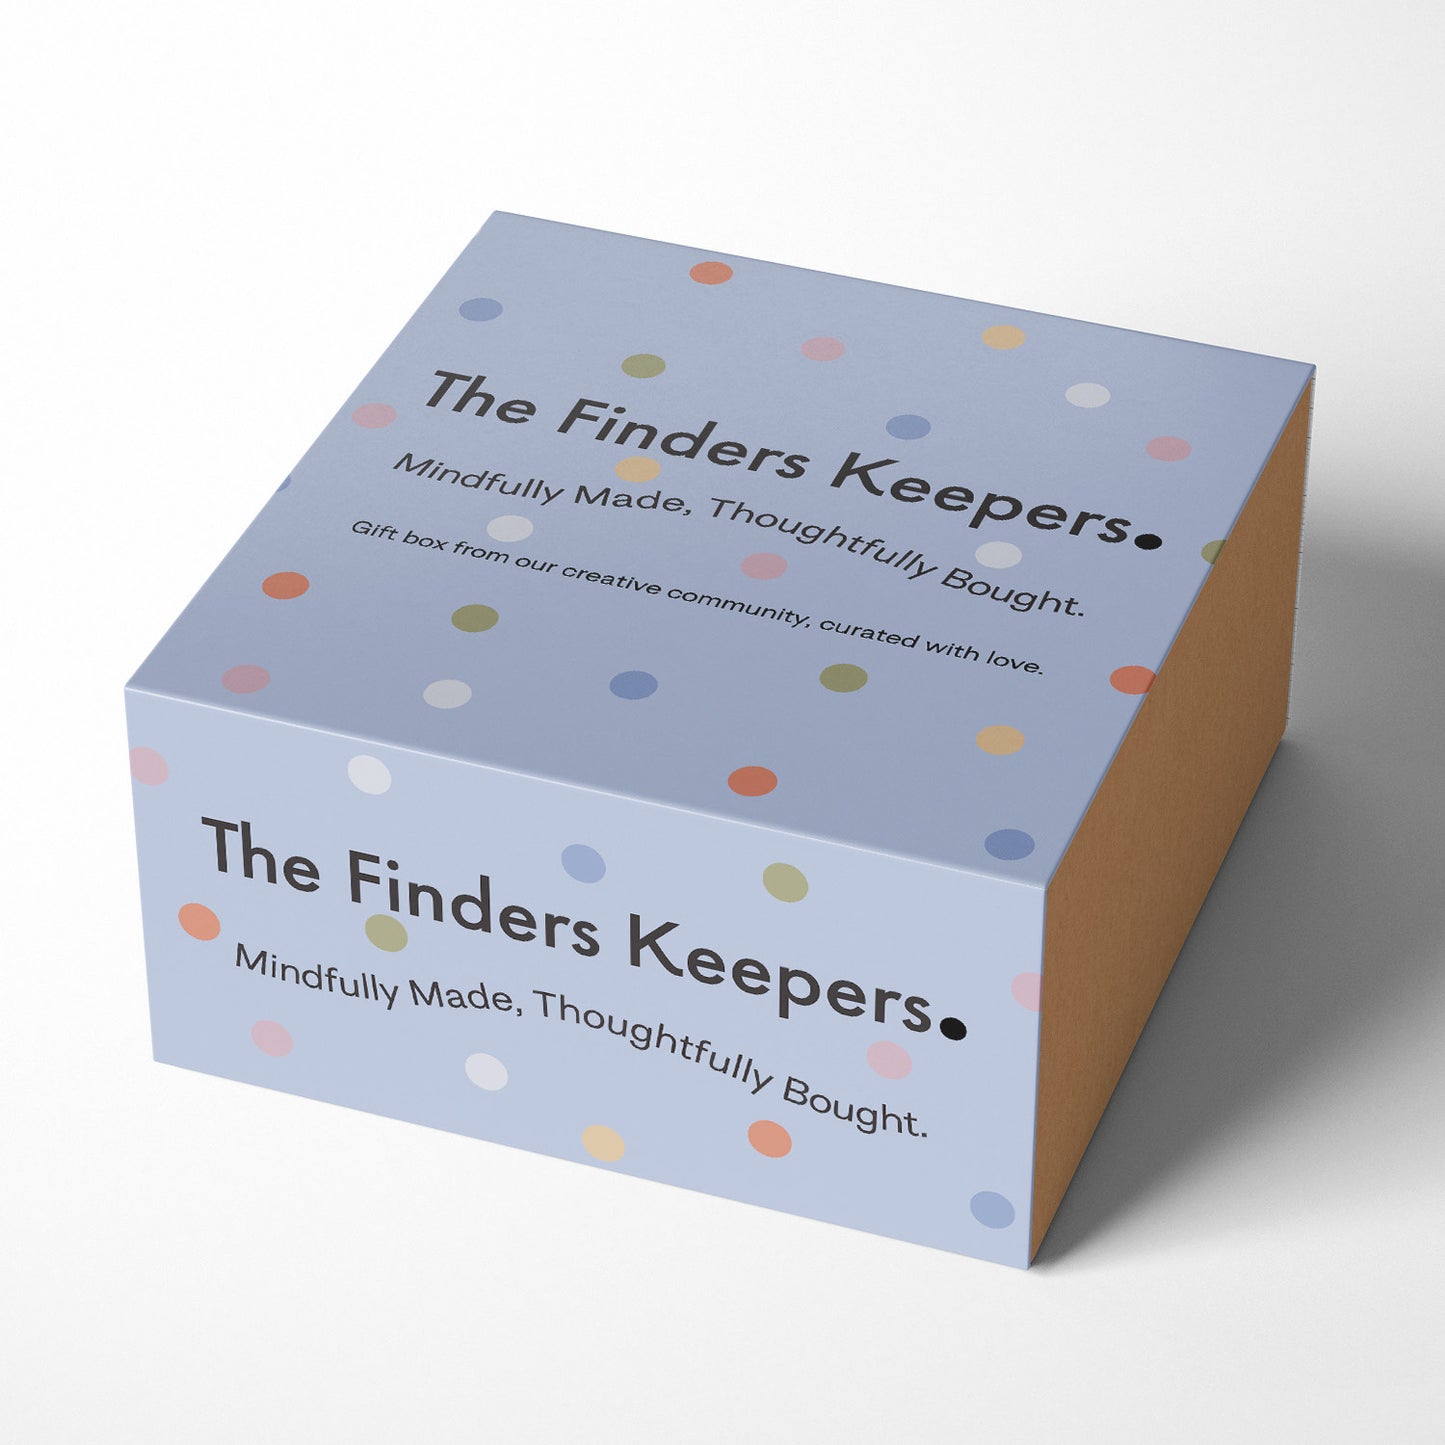 The Finders Keepers X Madebox Sip and Soak Box